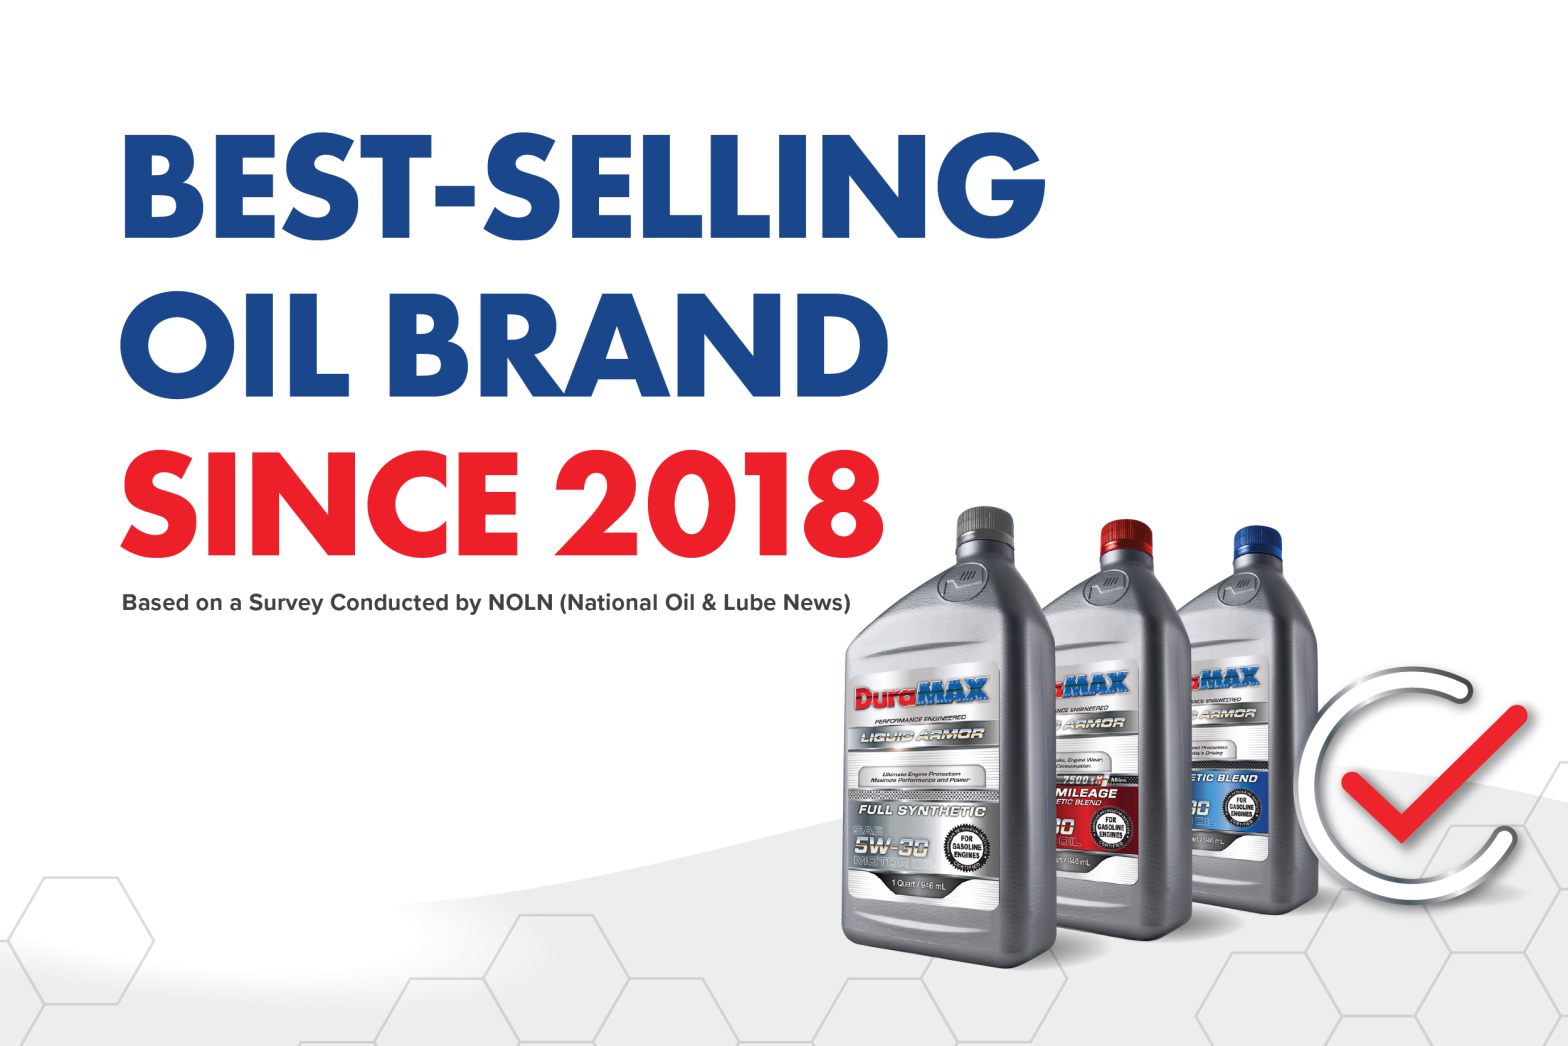 DuraMAX is the Best-Selling Oil Brand Since 2018